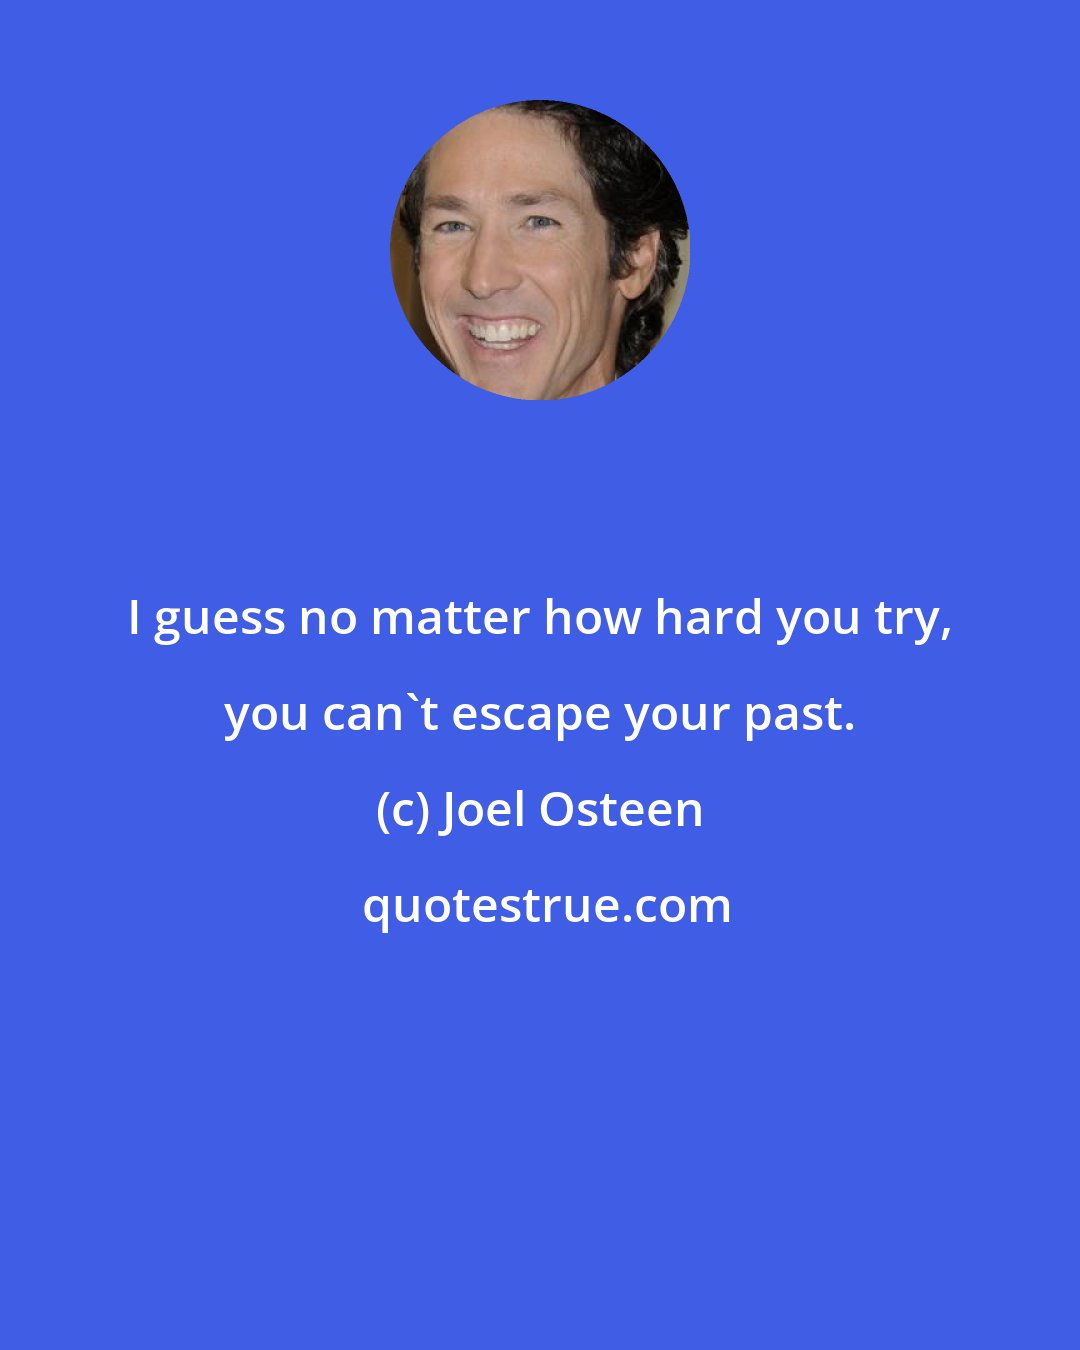 Joel Osteen: I guess no matter how hard you try, you can't escape your past.